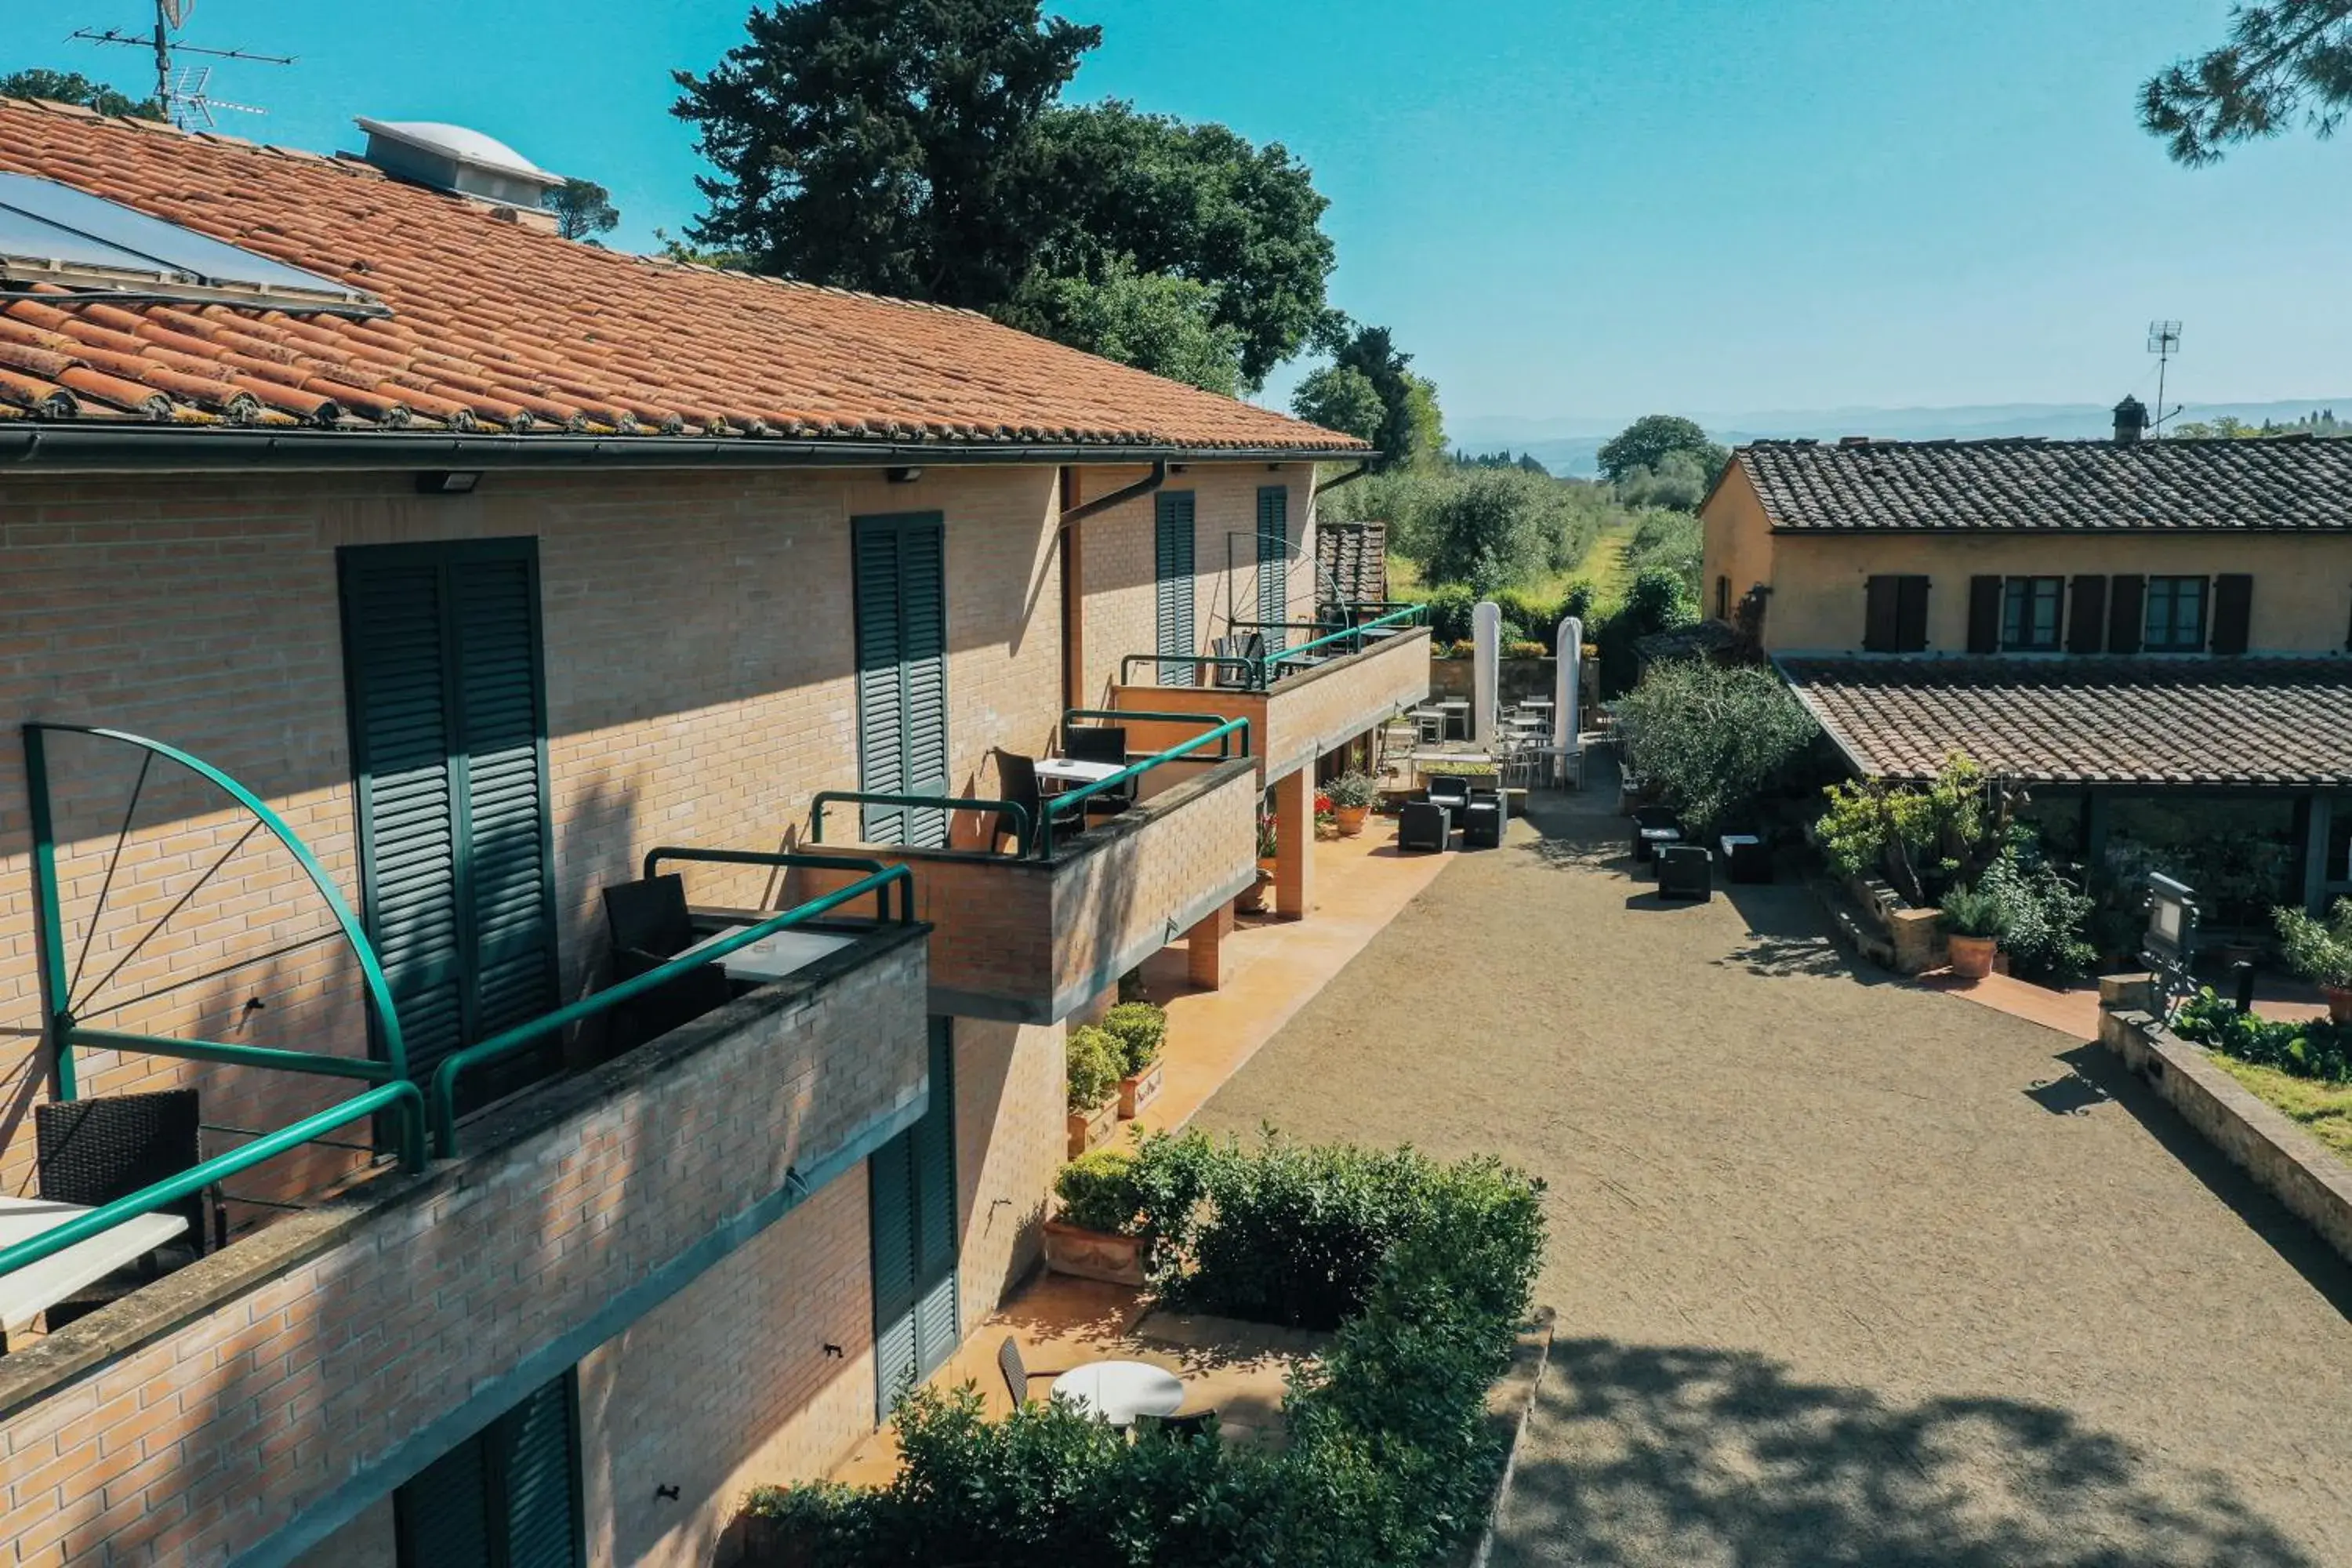 Property building in Hotel Le Colline